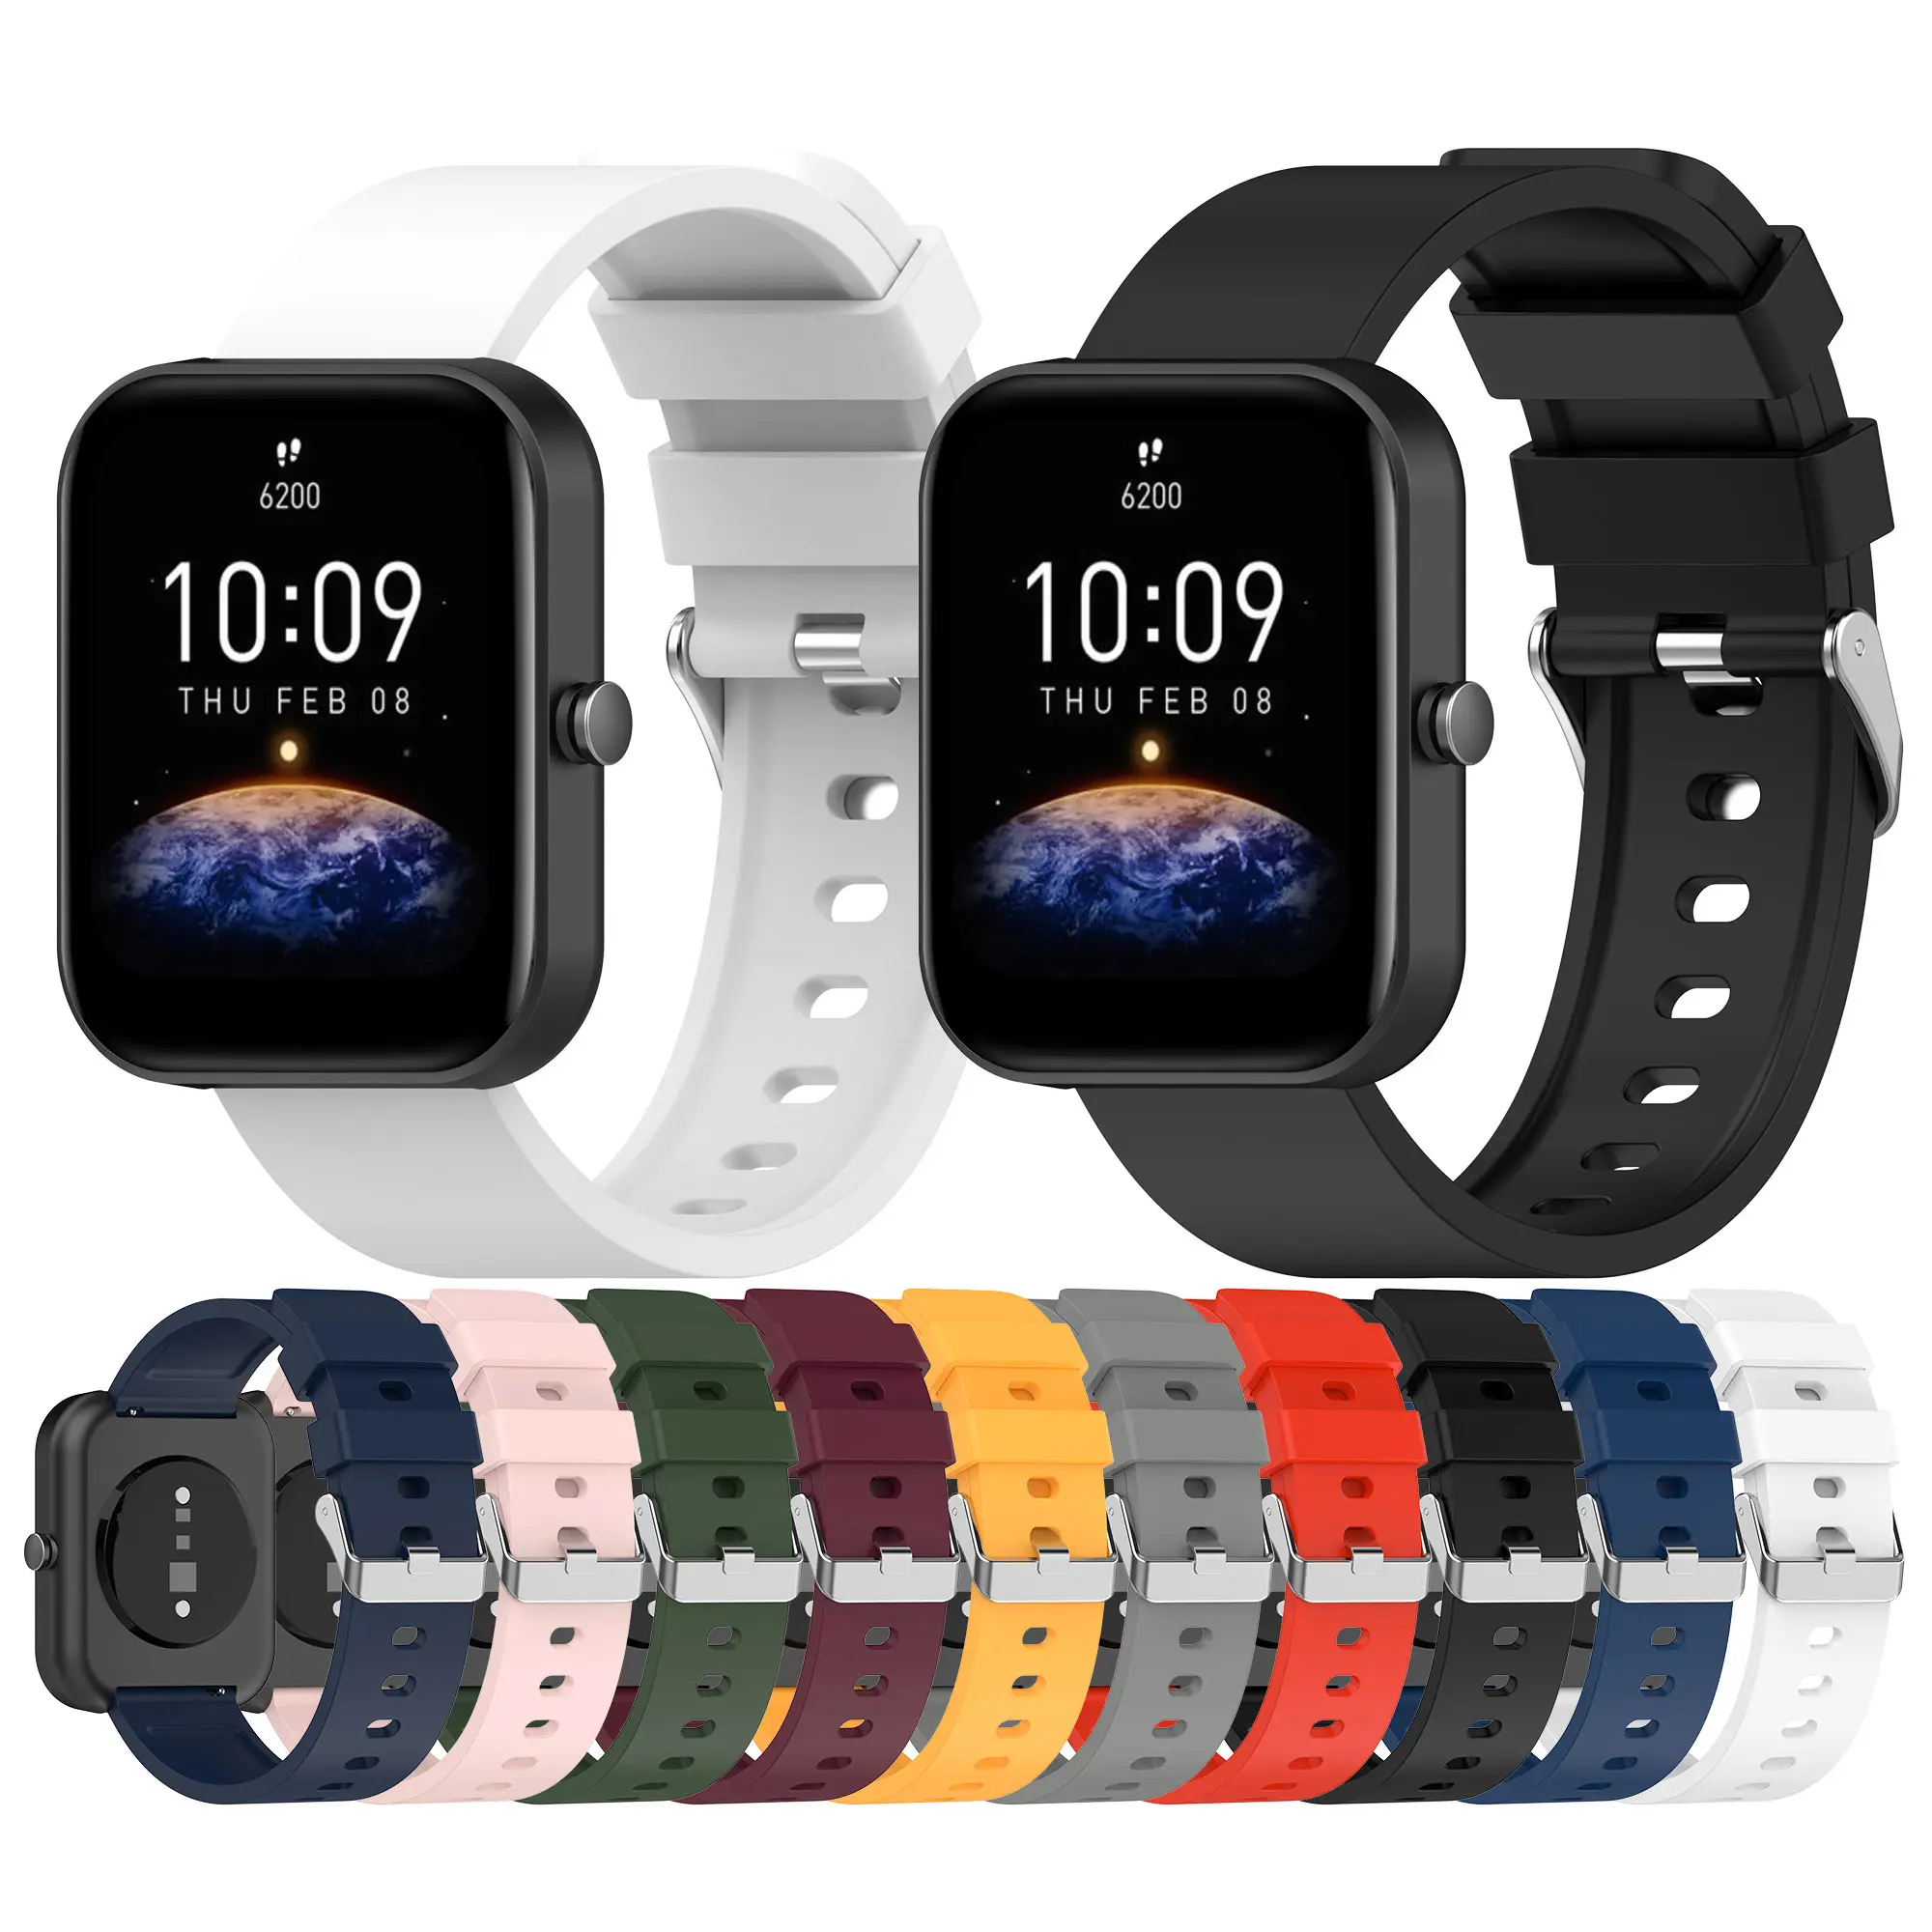 20mm Official Silicone Watch Bands For Amazfit Bip 3 Pro GTS4 Mini GTS 2 Replacement Wrist Strap